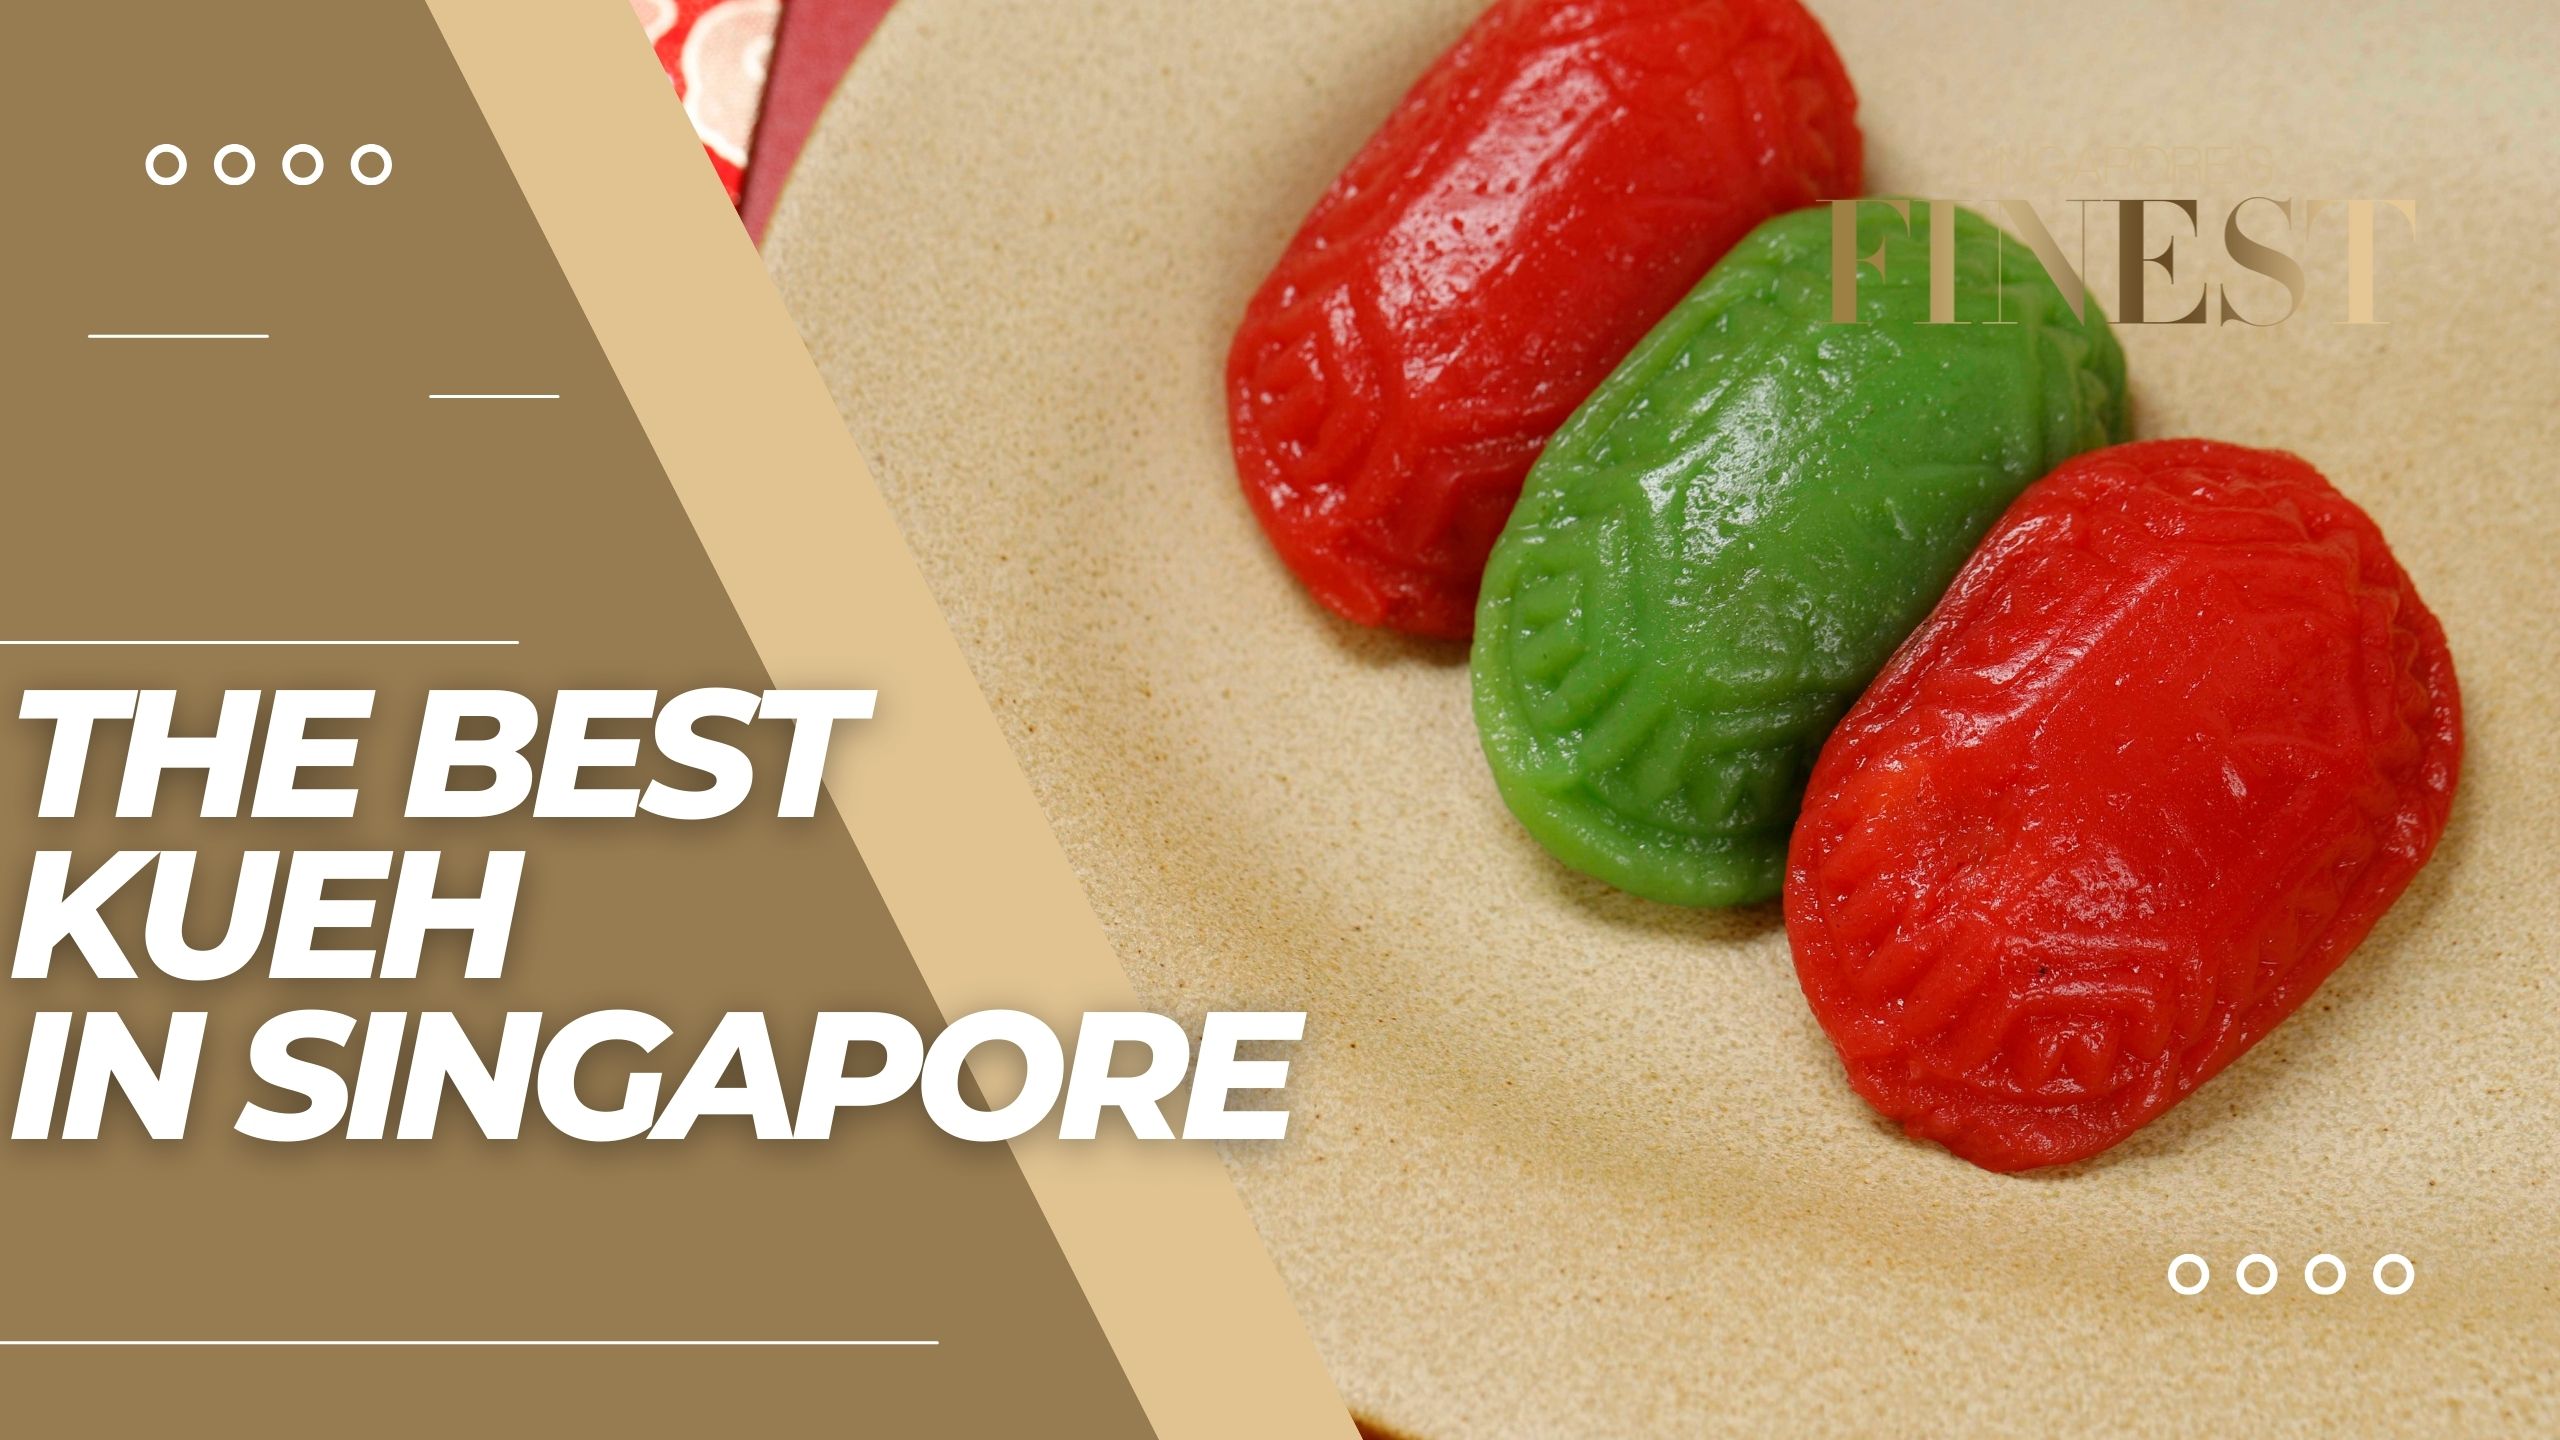 The Finest Kueh in Singapore